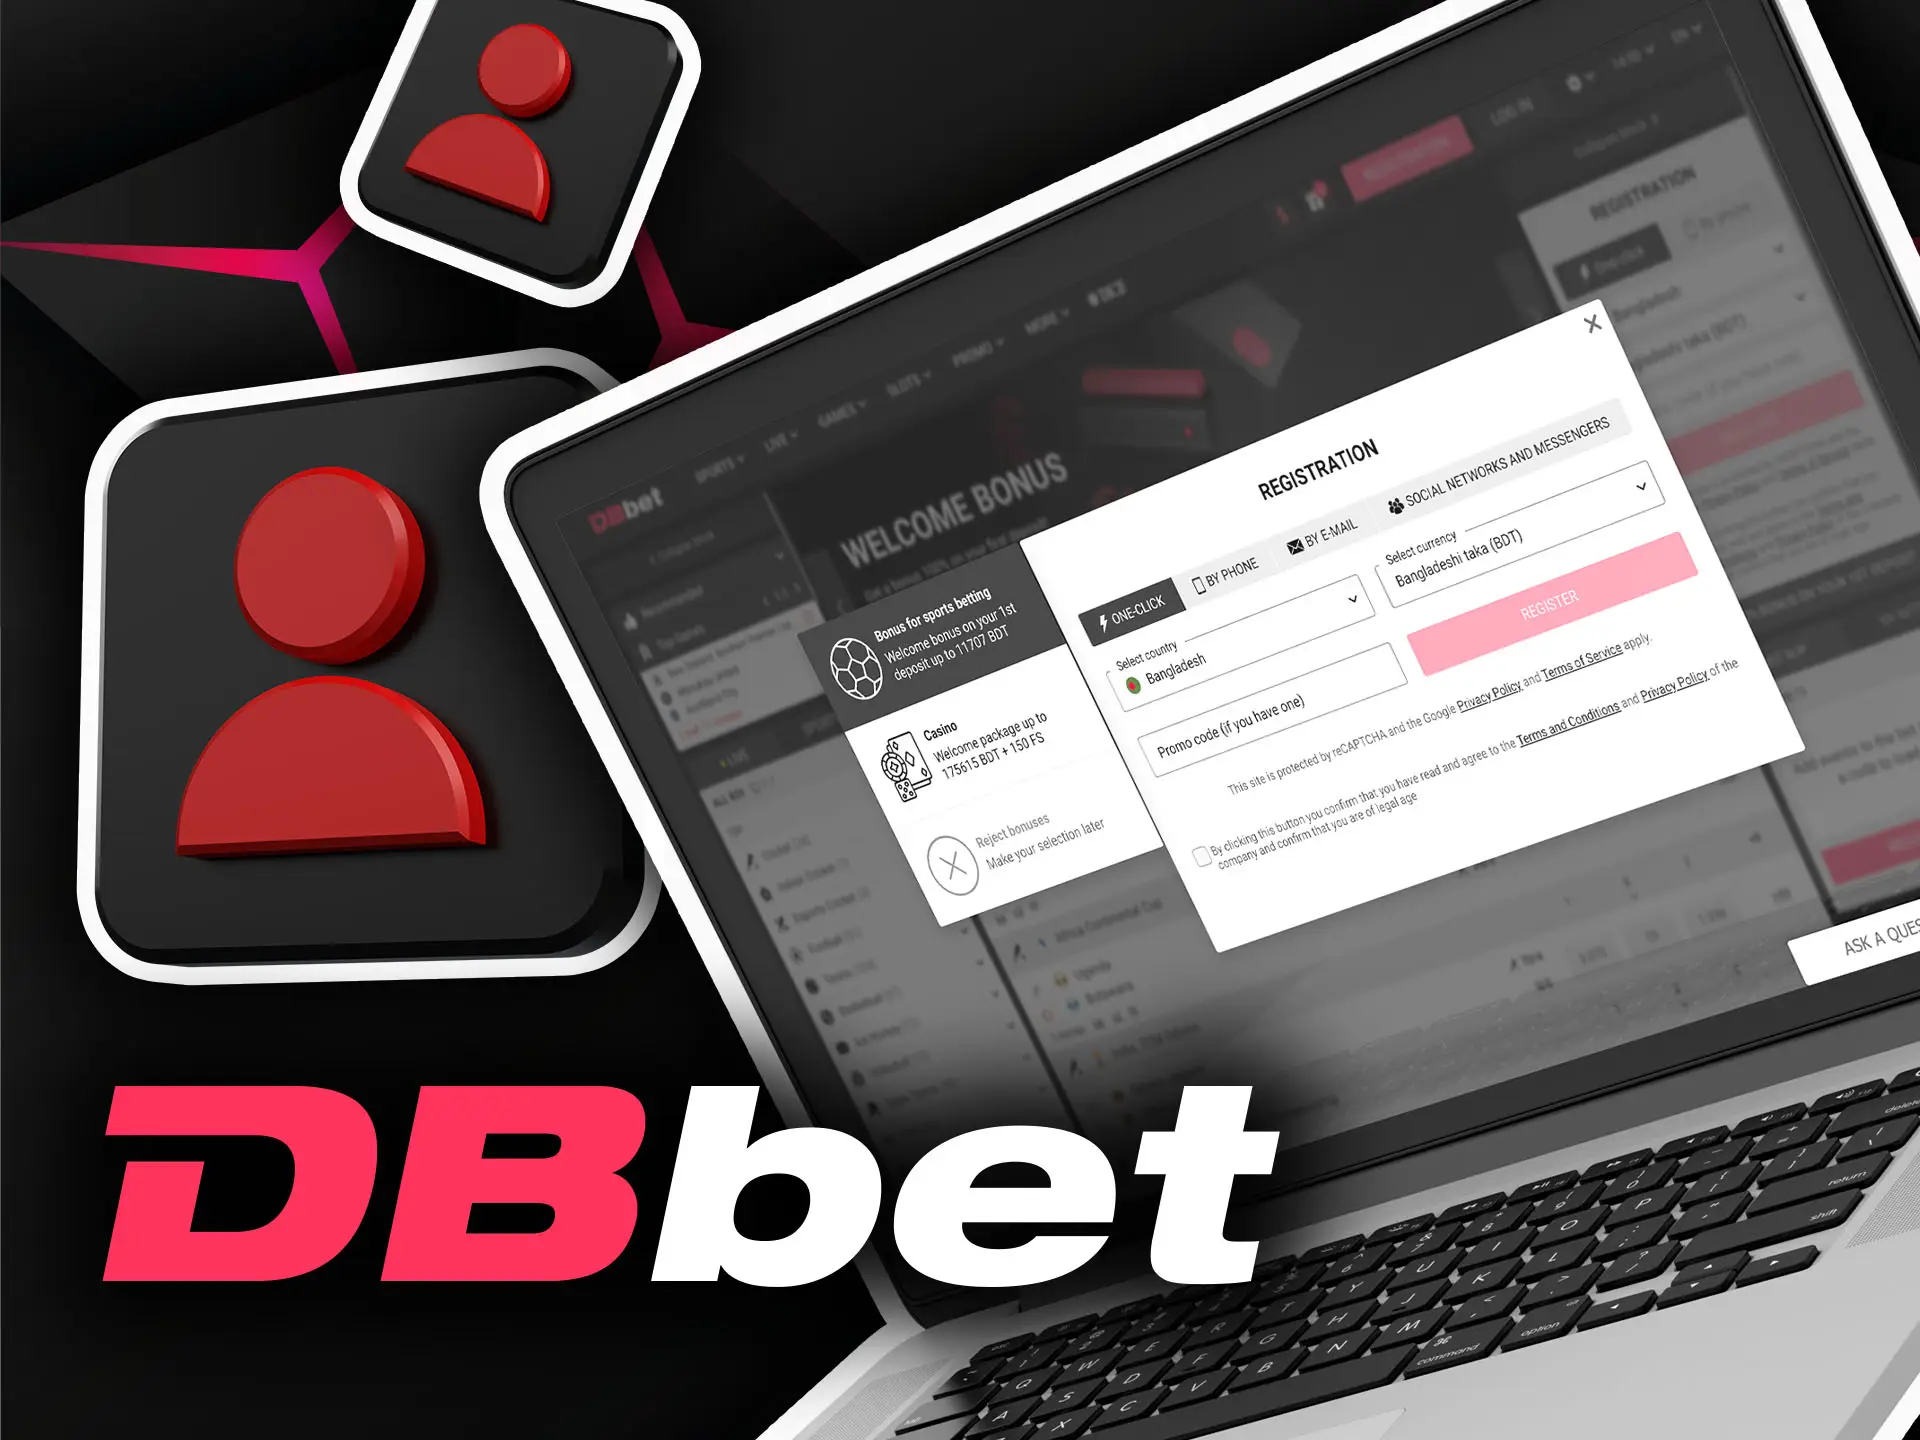 Sign up for DBbet to place bets on money.